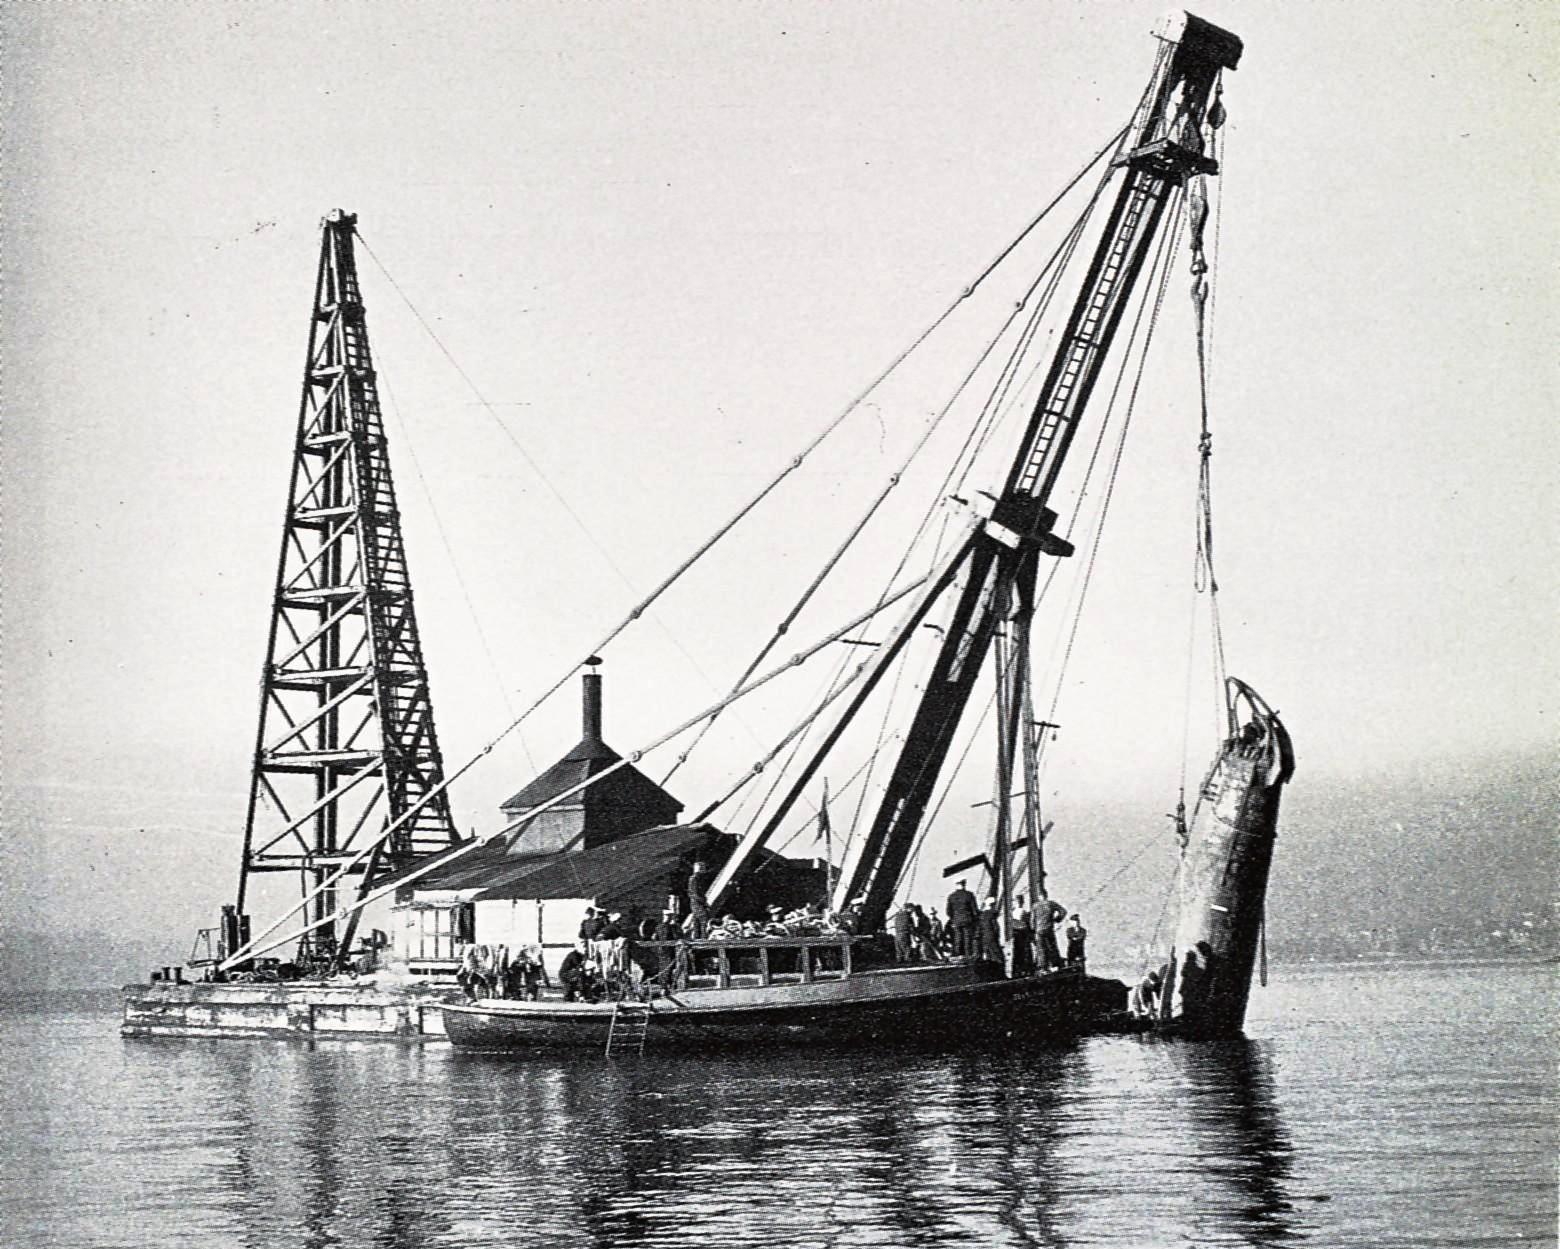 An historical image of a Japanese midget submarine M-22 being raised from Taylor's Bay, Sydney, 1942